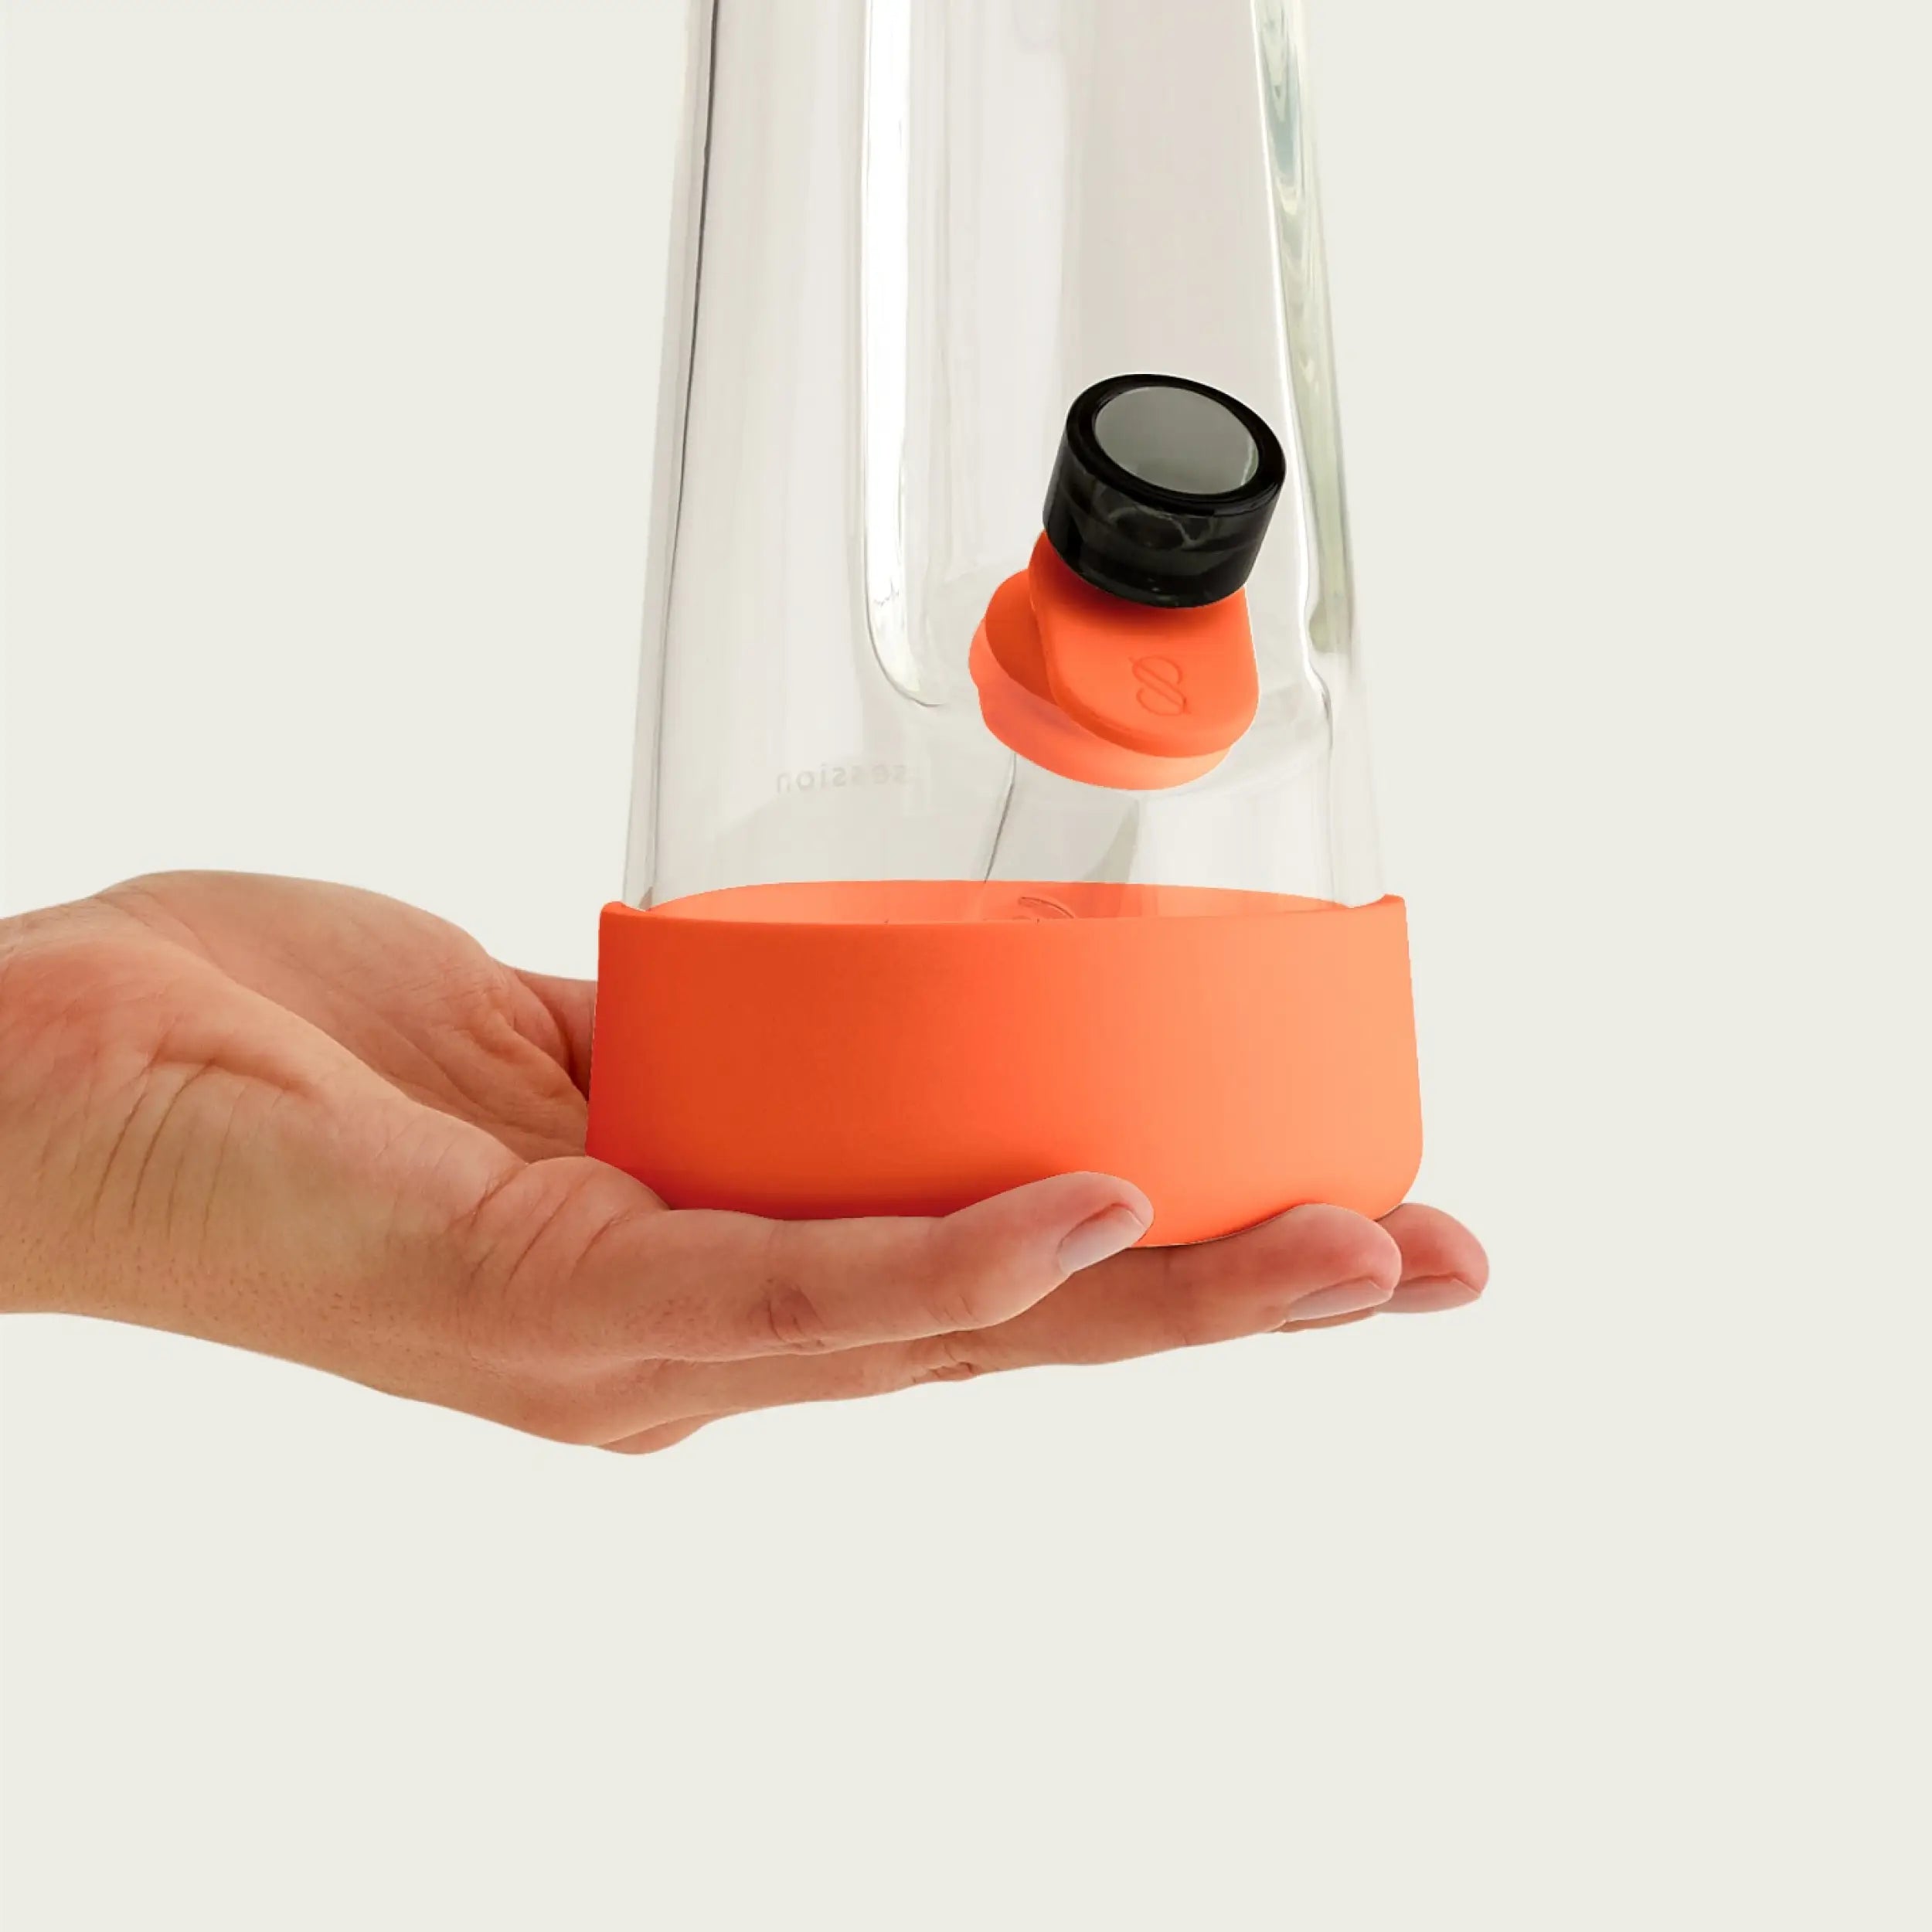 Enhance Your Session with Session Goods Bong Replacement Silicone in Horizon Orange.